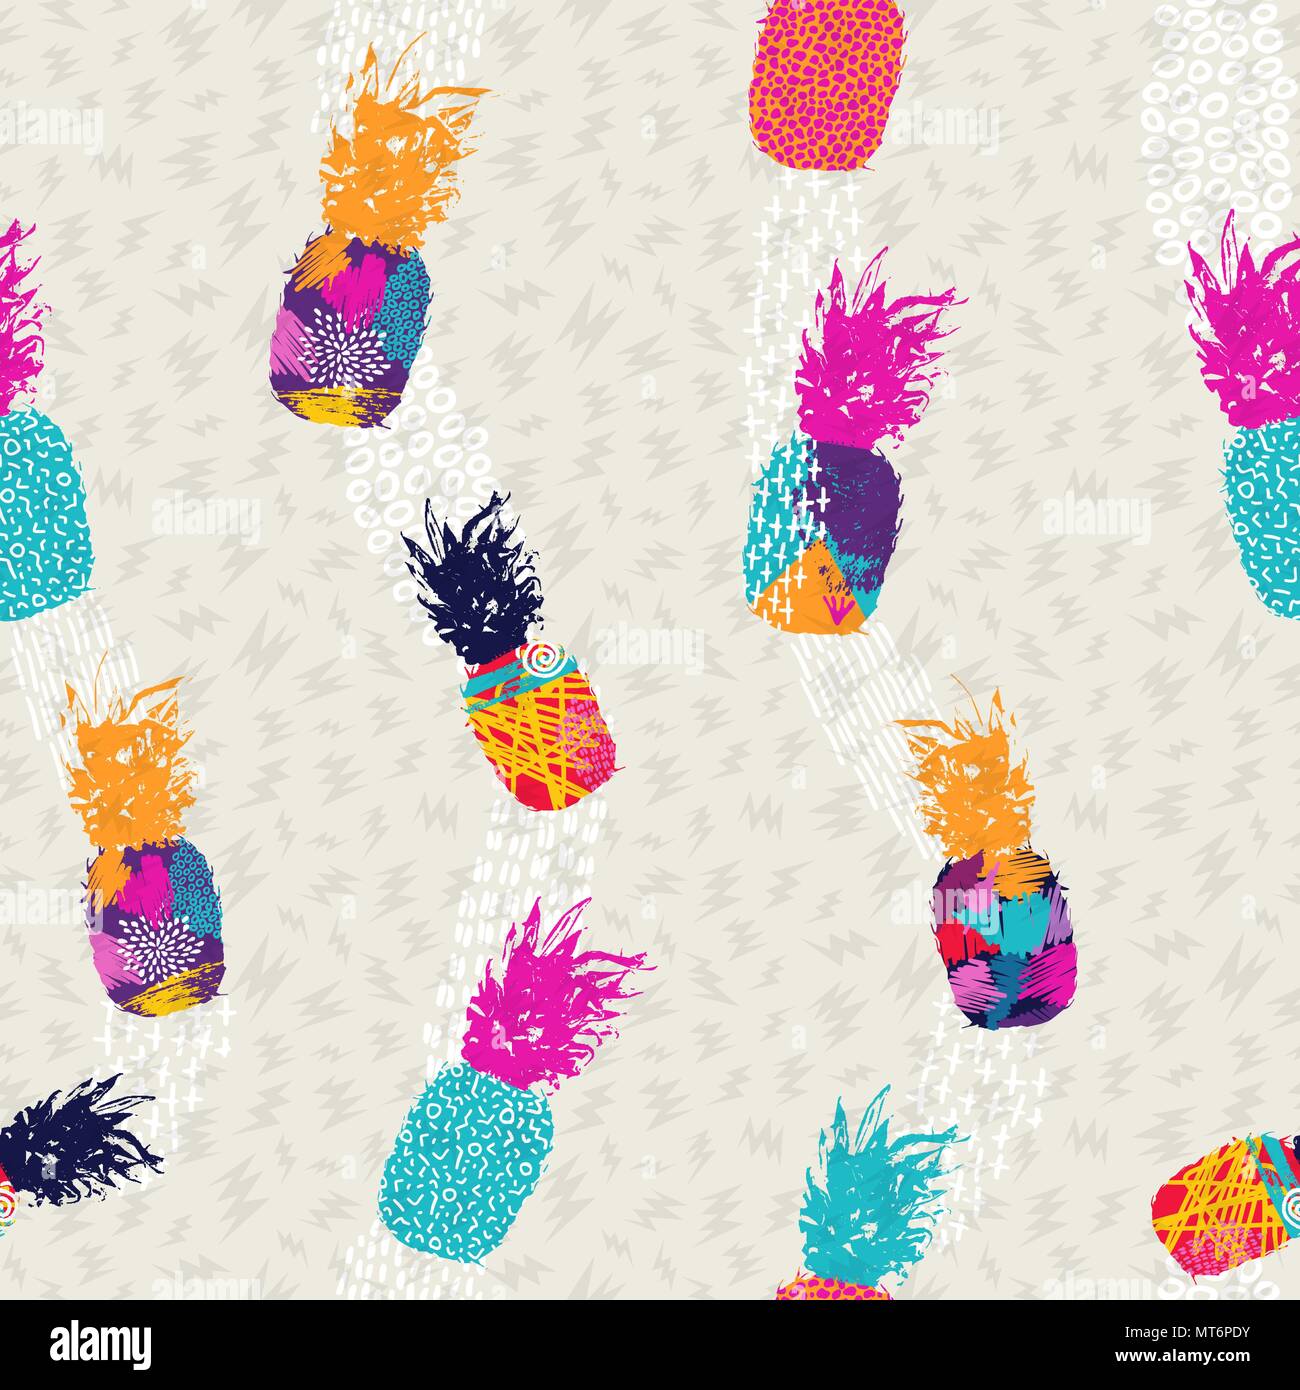 Summer seamless pattern design, pineapple fruit with abstract colorful art ideal for fun fashion print paper or fabric. EPS10 vector. Stock Vector